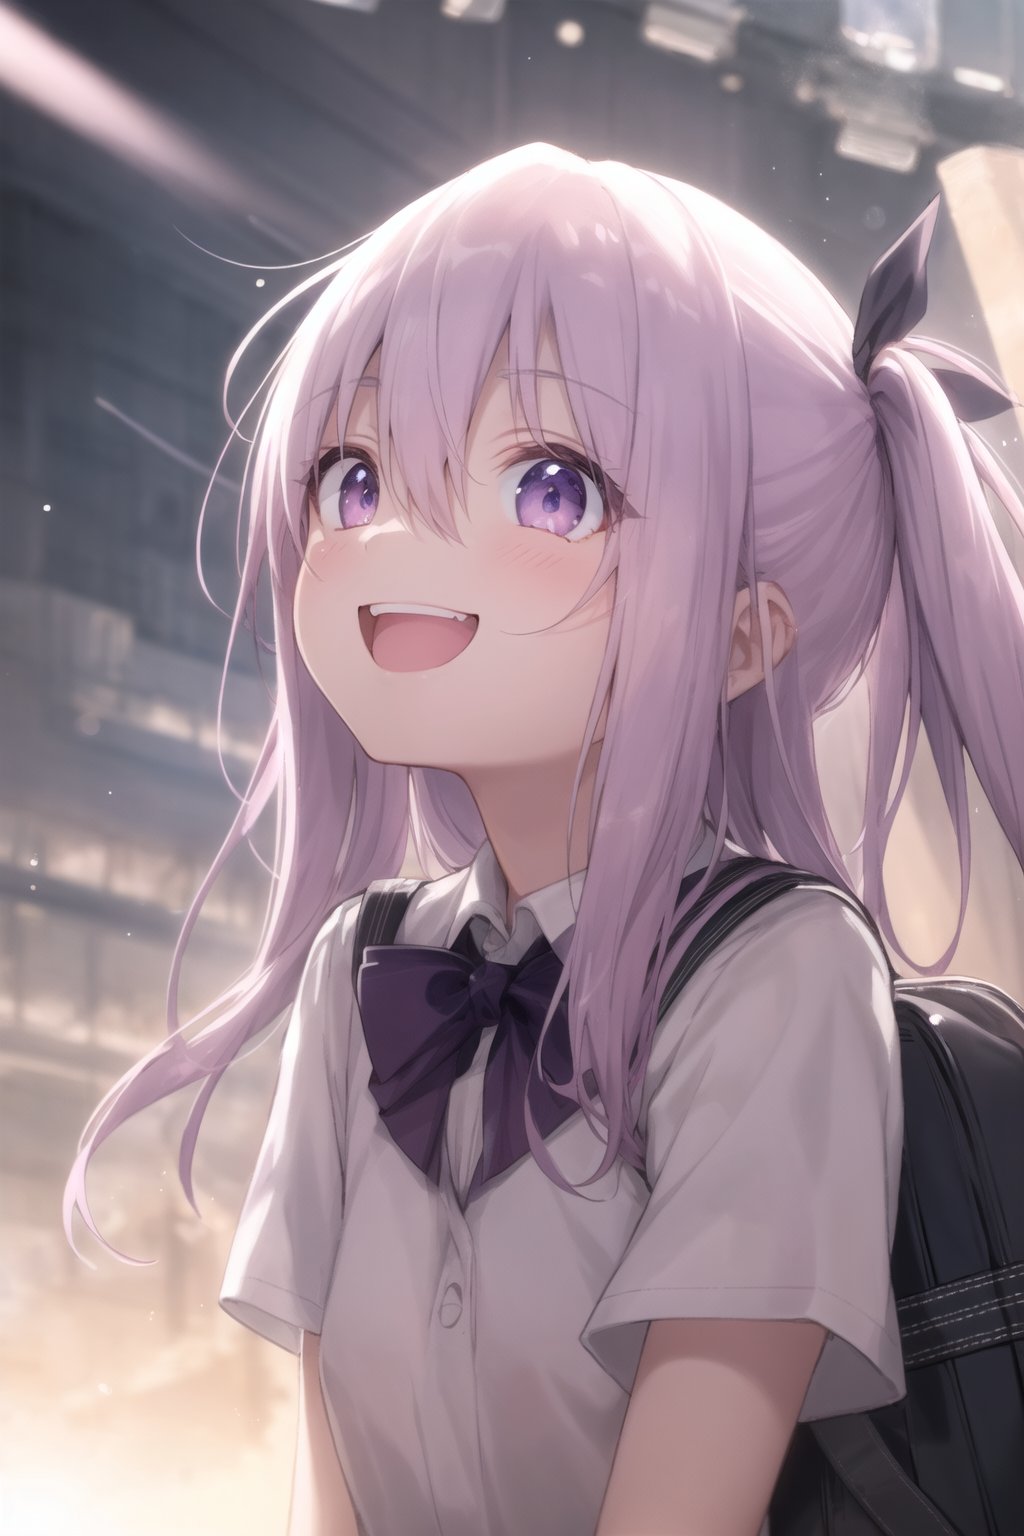 soft glowing light, bokeh effect, twilight, anime style, highly detailed,
a character with eyes narrowed from smiling, anime style, joyful expression, high detail, vibrant colors, 8k resolution, highly detailed face, sharp features, Extending a hand, morning , cloudy,
pastel colors:1.2,(8k,best quality), (highly detailed beautiful face and eyes),
short sleeve,  outdoor,  ((warming sunlight:1.5)),strong light,strong light coming in,light rays,backlighting,lens flare,spot light,faint light,light particles,dynamic lighting,cinematic lighting,((neon art)),
BREAK ((cute eyes)), ((upper body)), ((looking up)), school uniform, short sleeve white blouse,
(light purple eyes),(17yo),(1girl), (light purple hair),(long hair:1.1),wavy hair:1.1,(flat chest),hime cut,cute eyes,;d, happy smile,smile eyes,happy smile,cute eyes, ;>, ;d, (a school bag),
